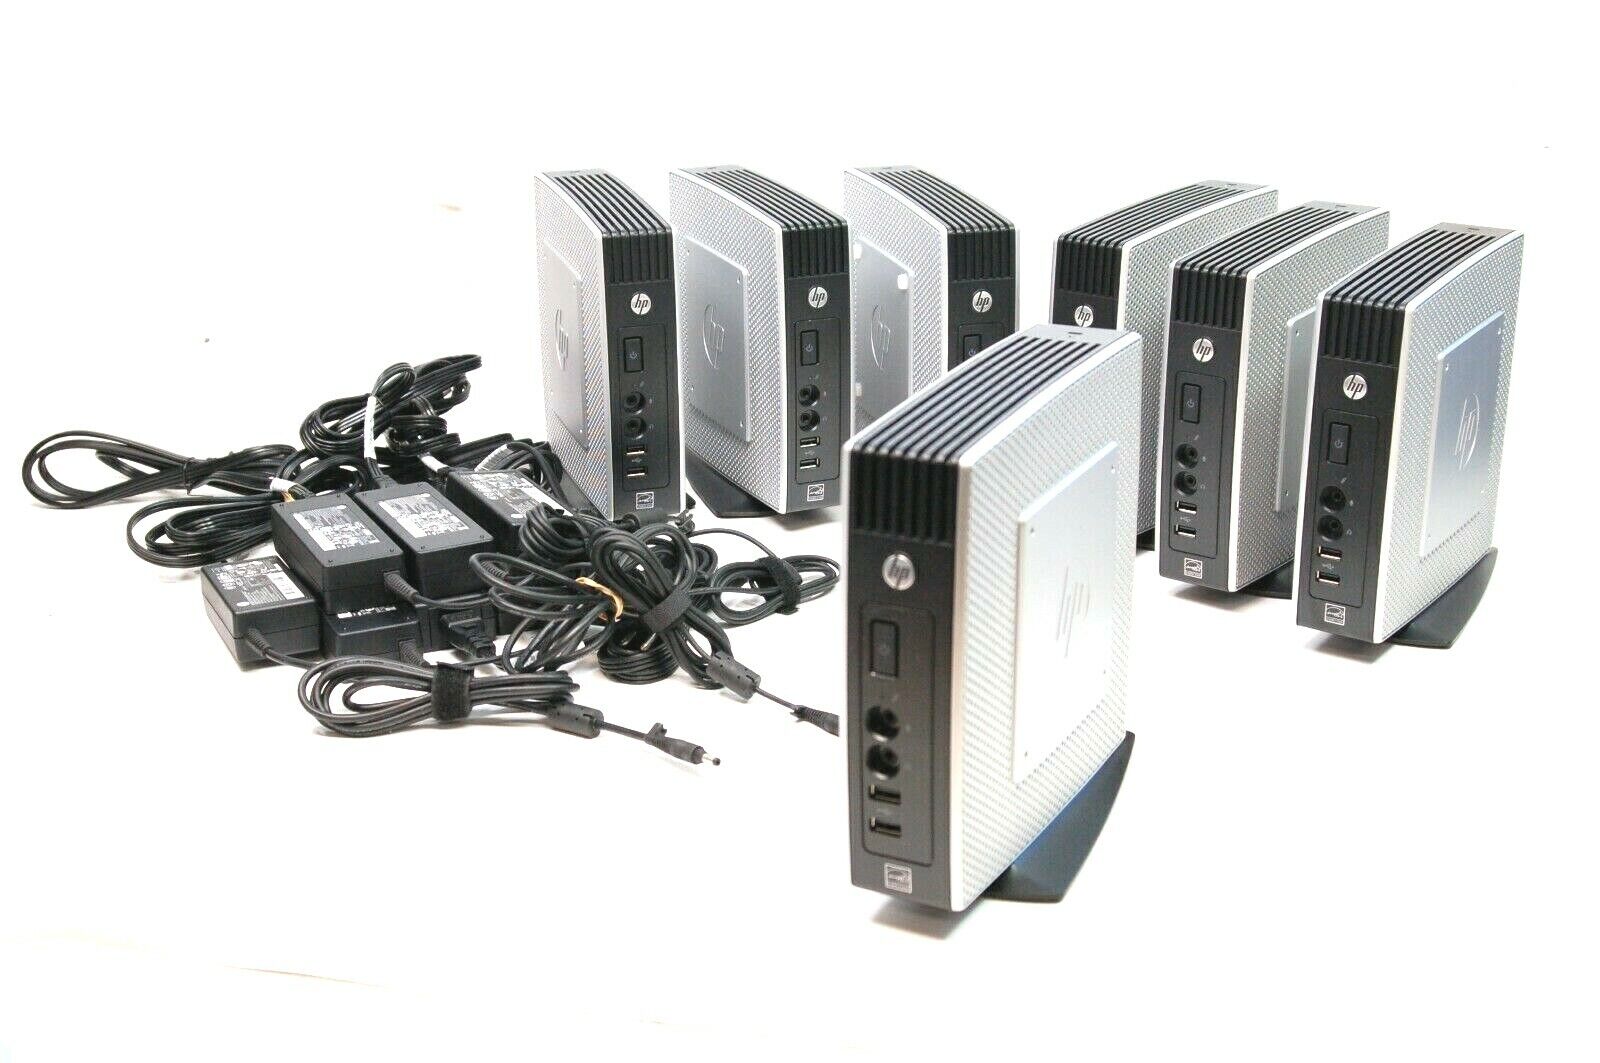 Lot of 7 HP T510 Thin Client Untested Computers w/ Power Supplies